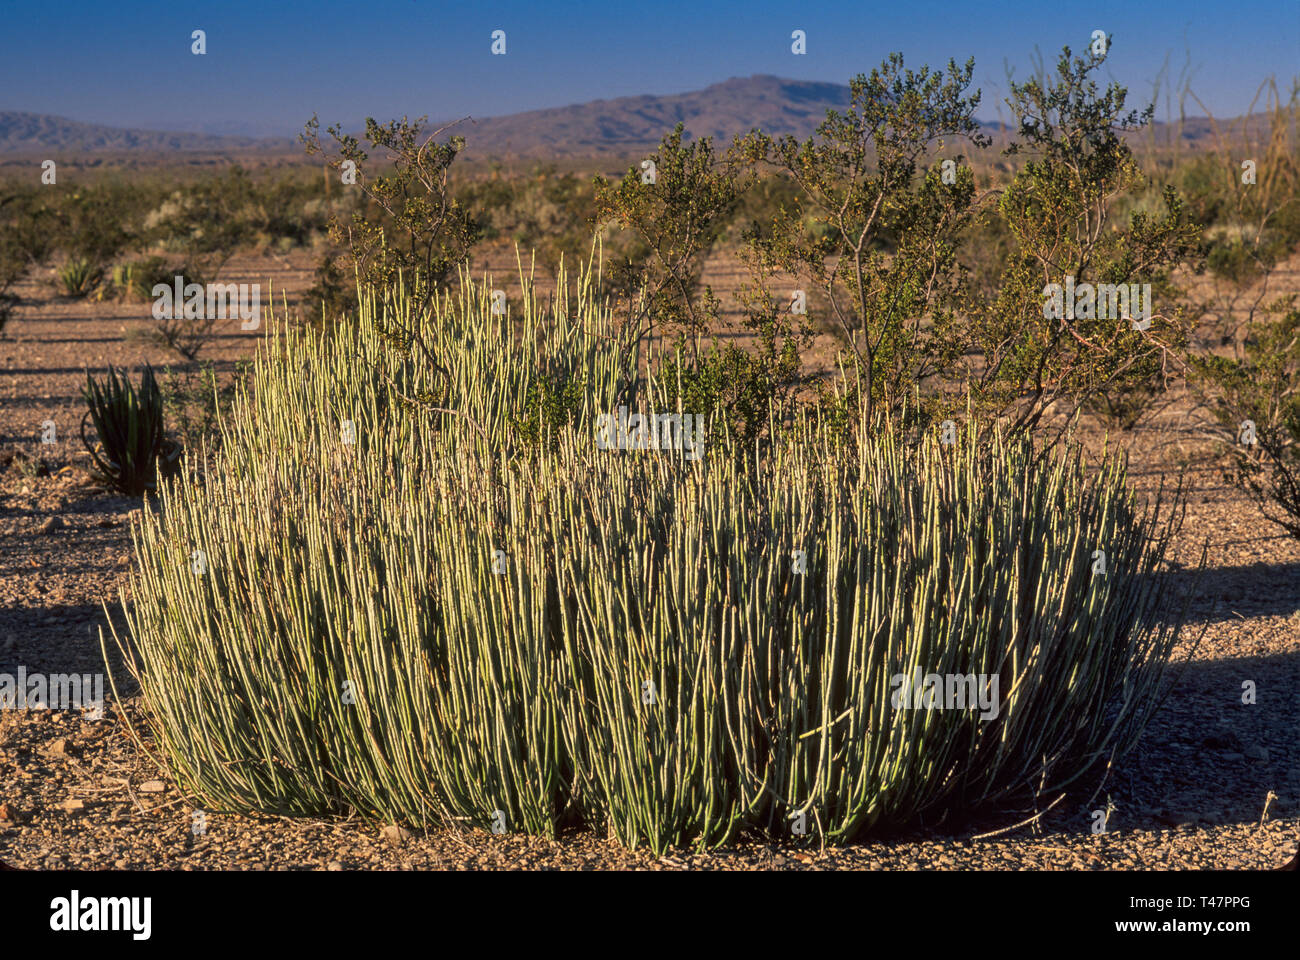 Candelilla and creosote bushes at Chihuahuan Desert near Old Ore Road in Big Bend National Park, Texas, USA Stock Photo